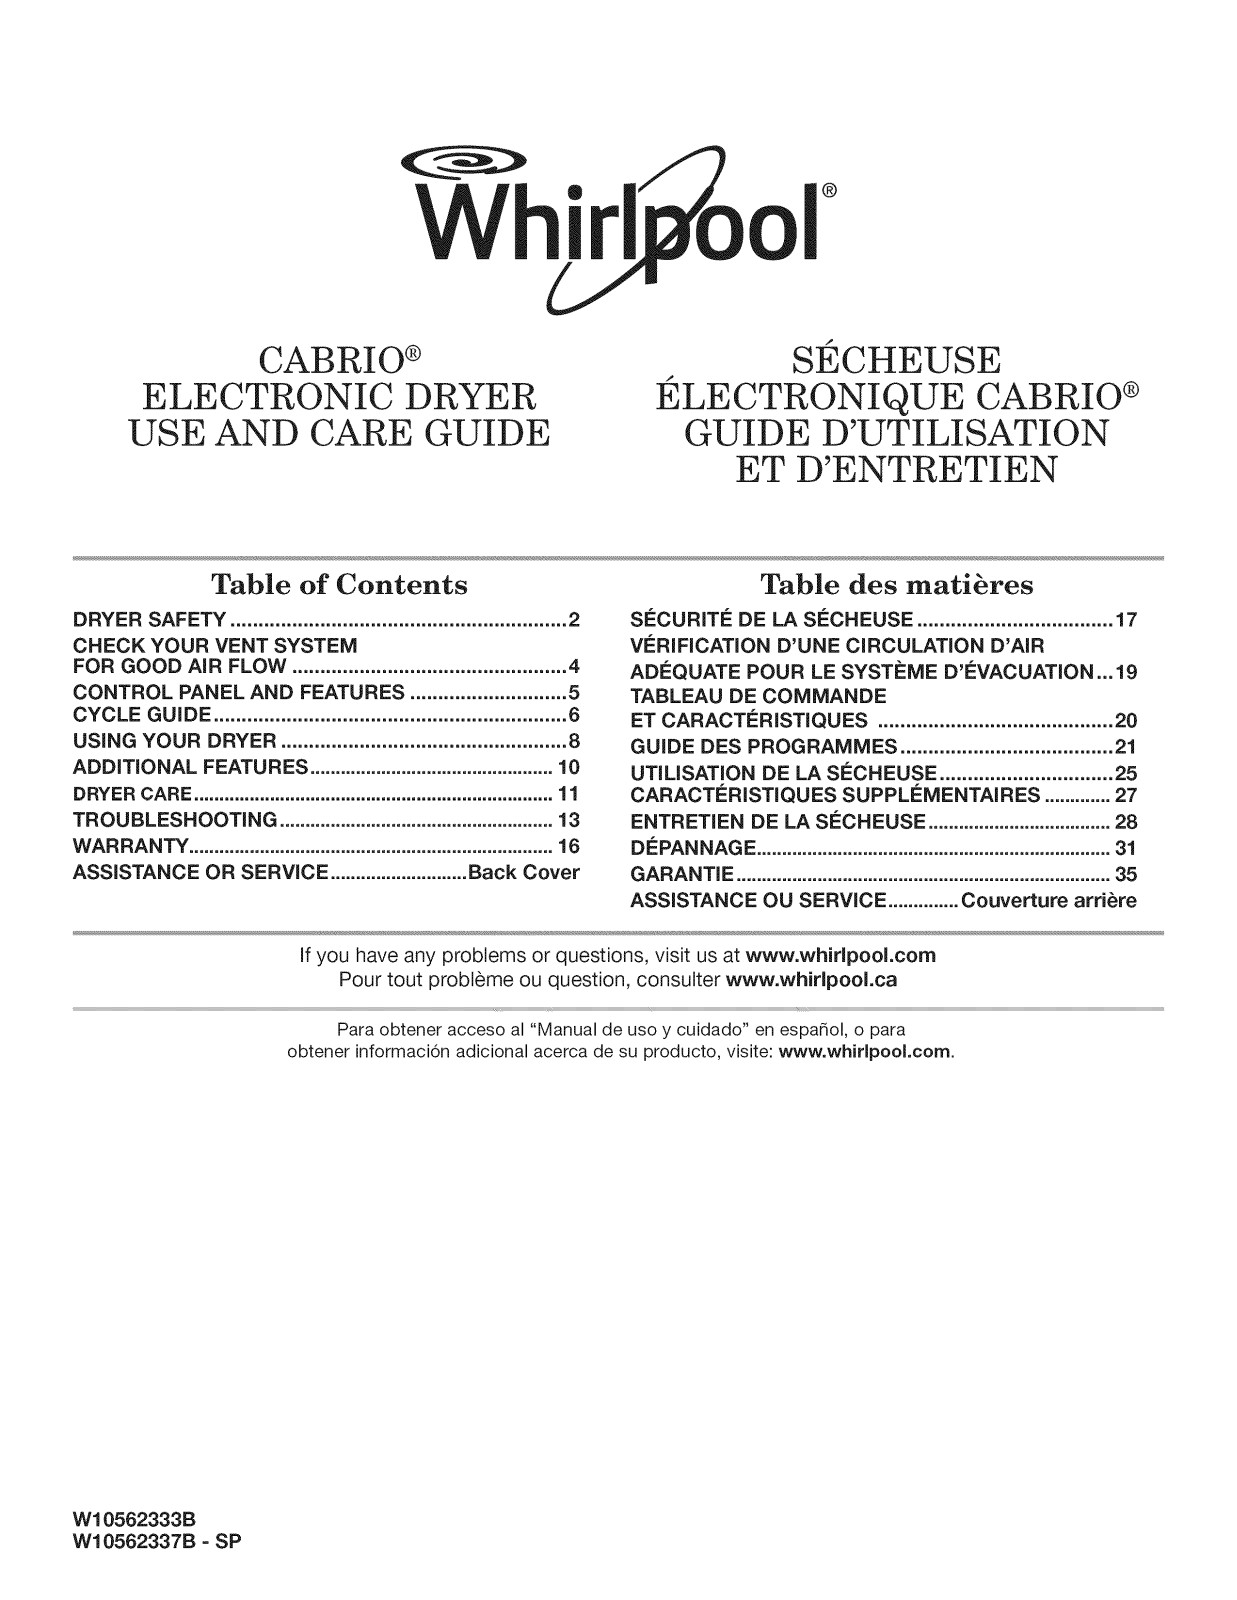 Whirlpool YWED8500BW0, YWED8500BC0, WGD8500BR0, WED8500BR0 Owner’s Manual